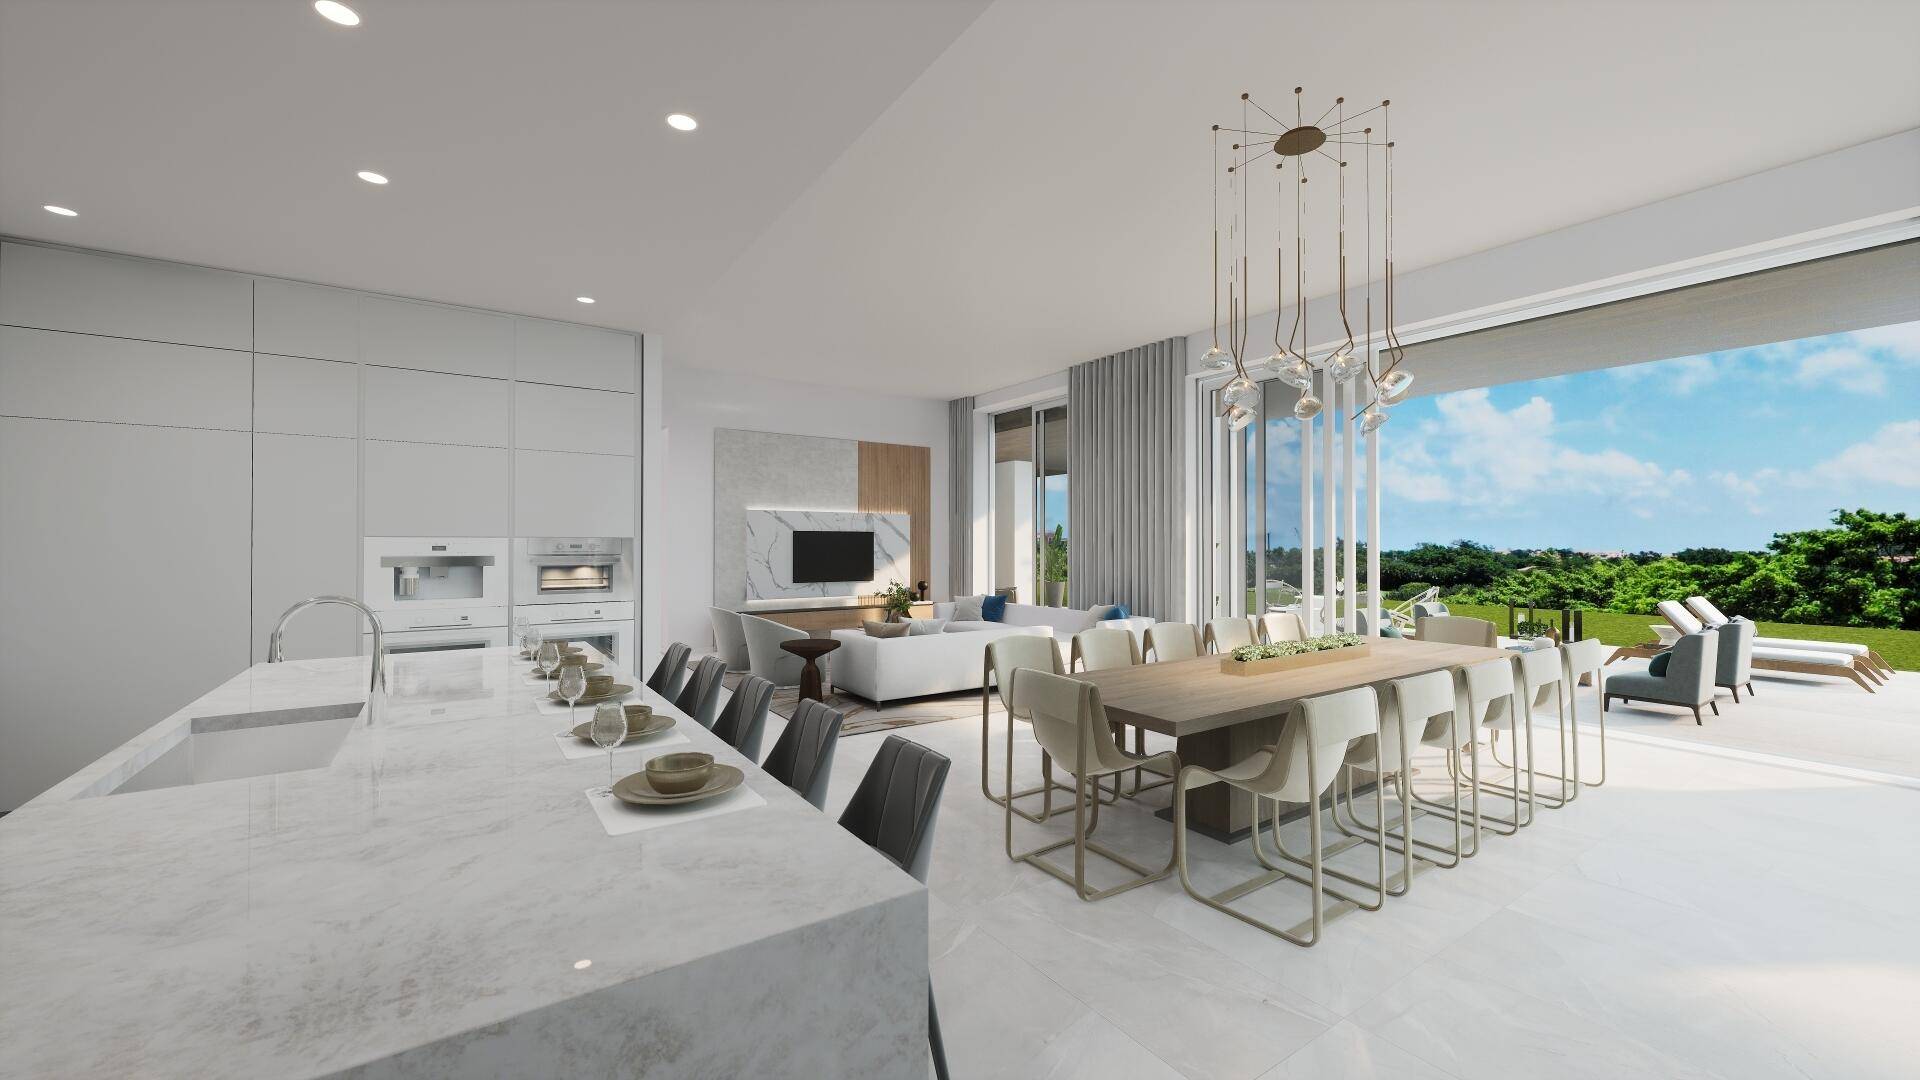 Villa 103 is a special offering in the hottest downtown Boca Raton luxury pre construction opportunity, ALINA.